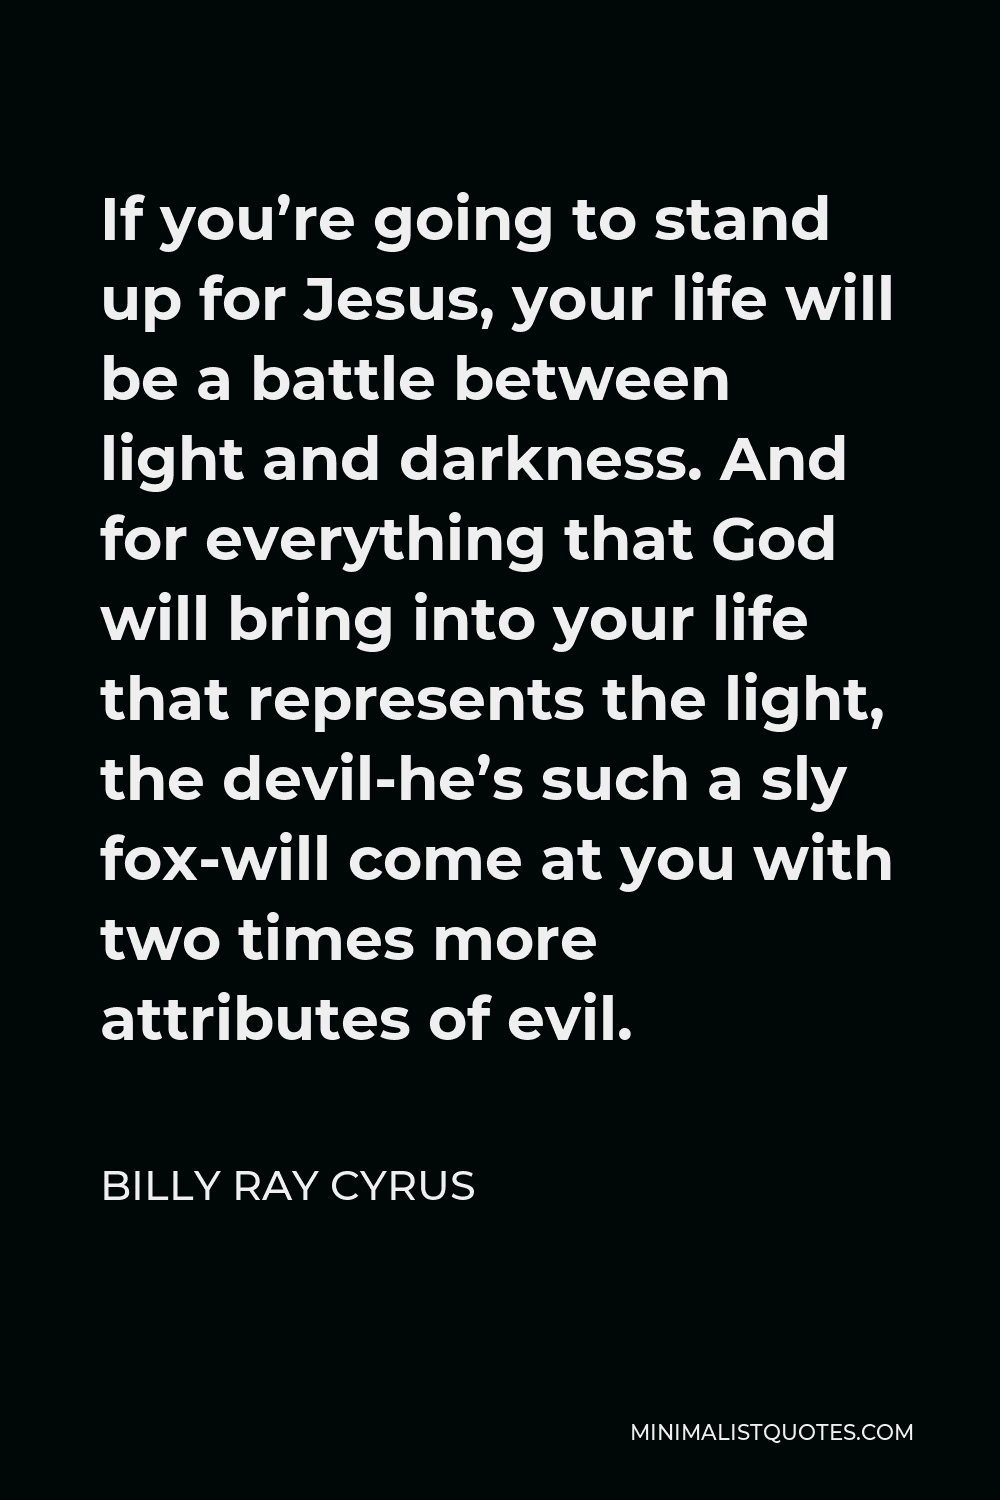 Billy Ray Cyrus Quote - If you’re going to stand up for Jesus, your life will be a battle between light and darkness. And for everything that God will bring into your life that represents the light, the devil-he’s such a sly fox-will come at you with two times more attributes of evil.